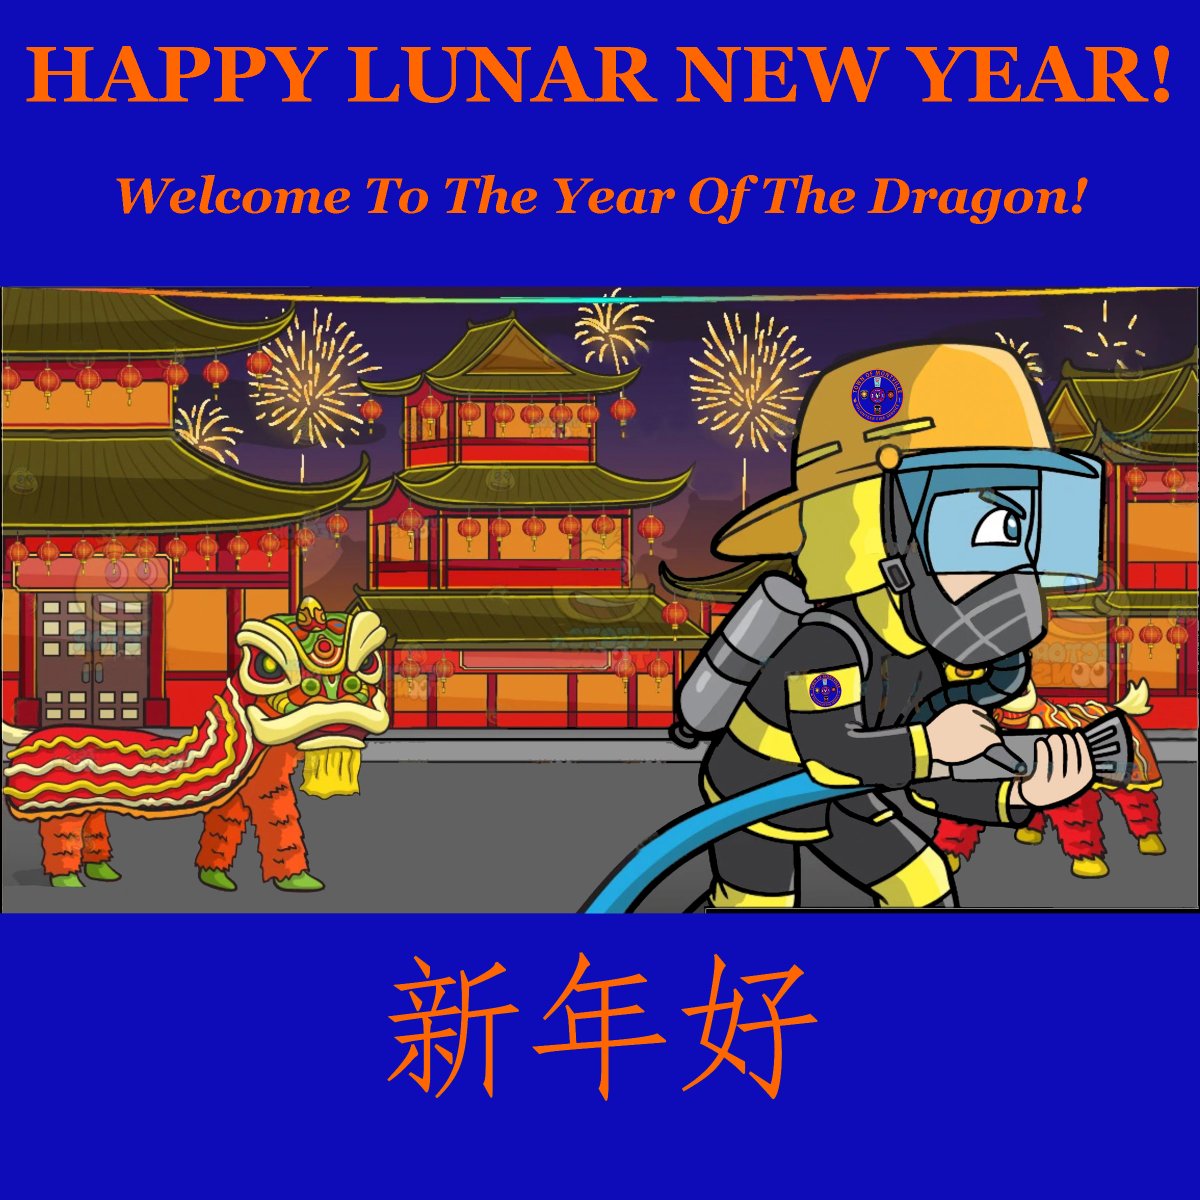 Happy Lunar New Year!

Welcome To The Year Of The Dragon!

#MTVCT #Montville #MontvilleCT #CT #Connecticut #LunarNewYear #LunarNewYear2024 #ChineseNewYear #ChineseNewYear2024 #GongXiFaCai